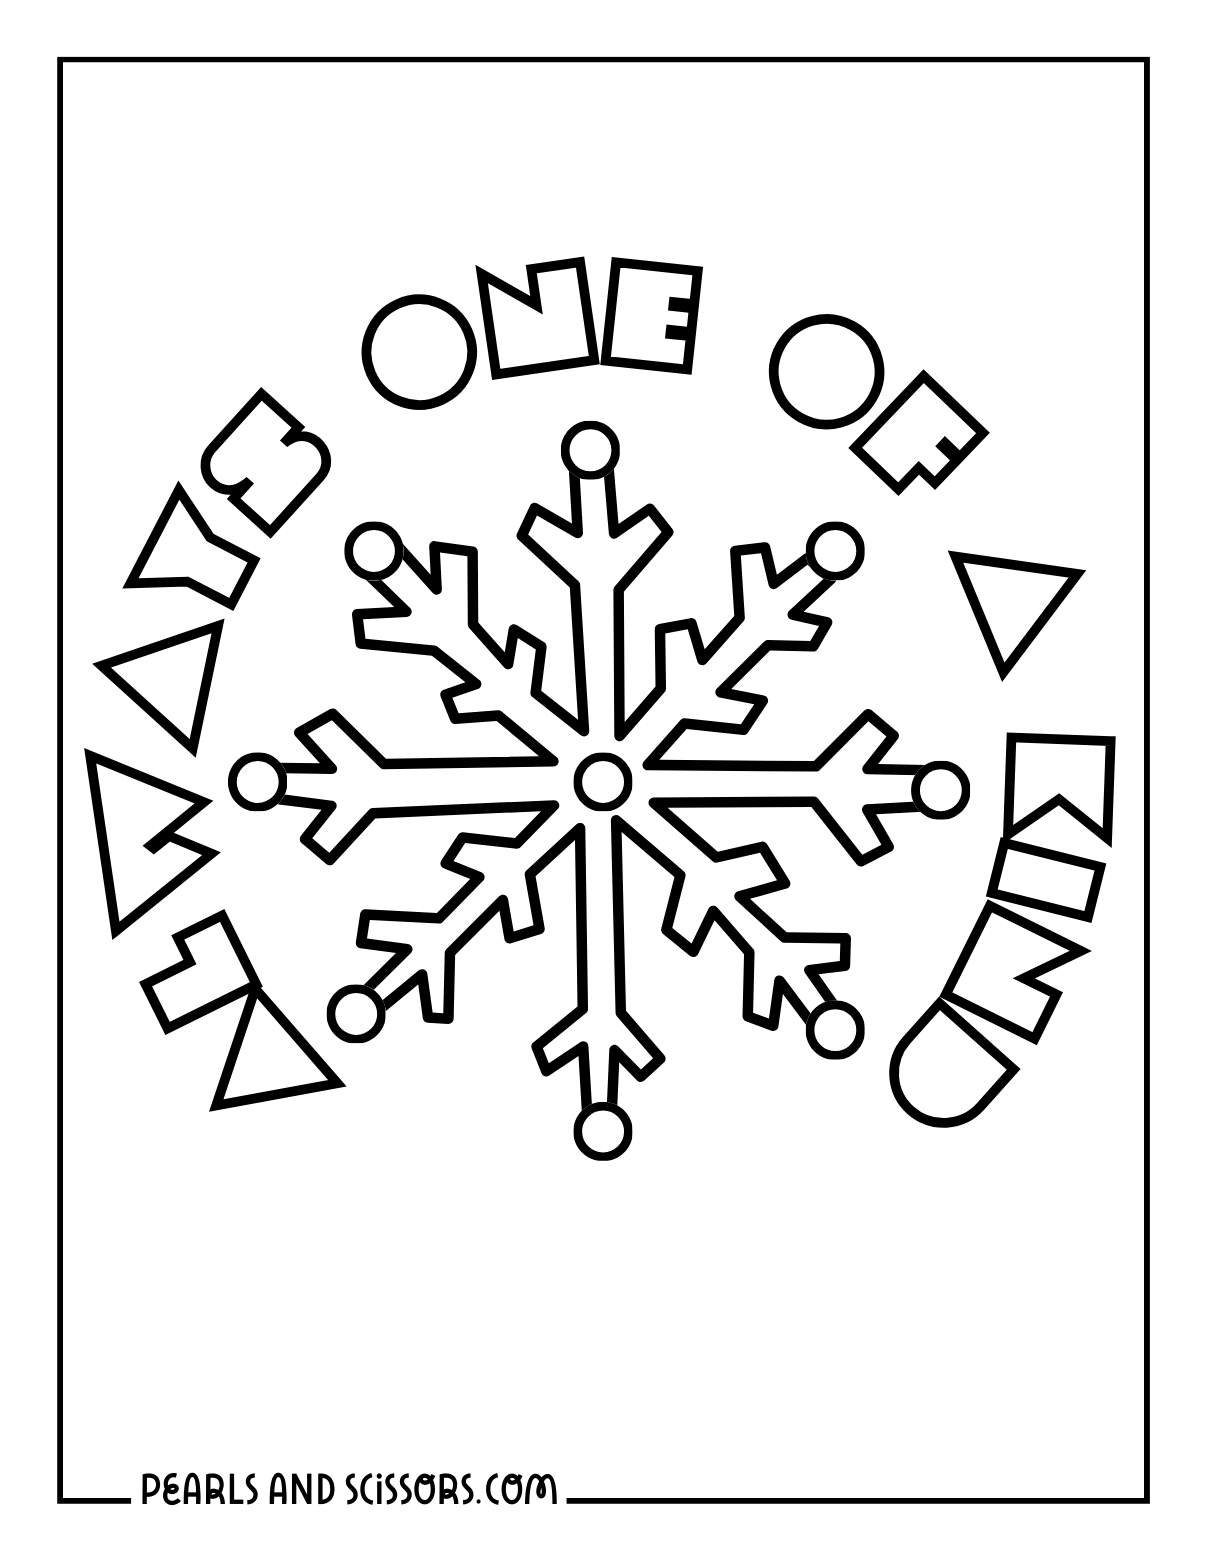 Simple snowflake coloring page.